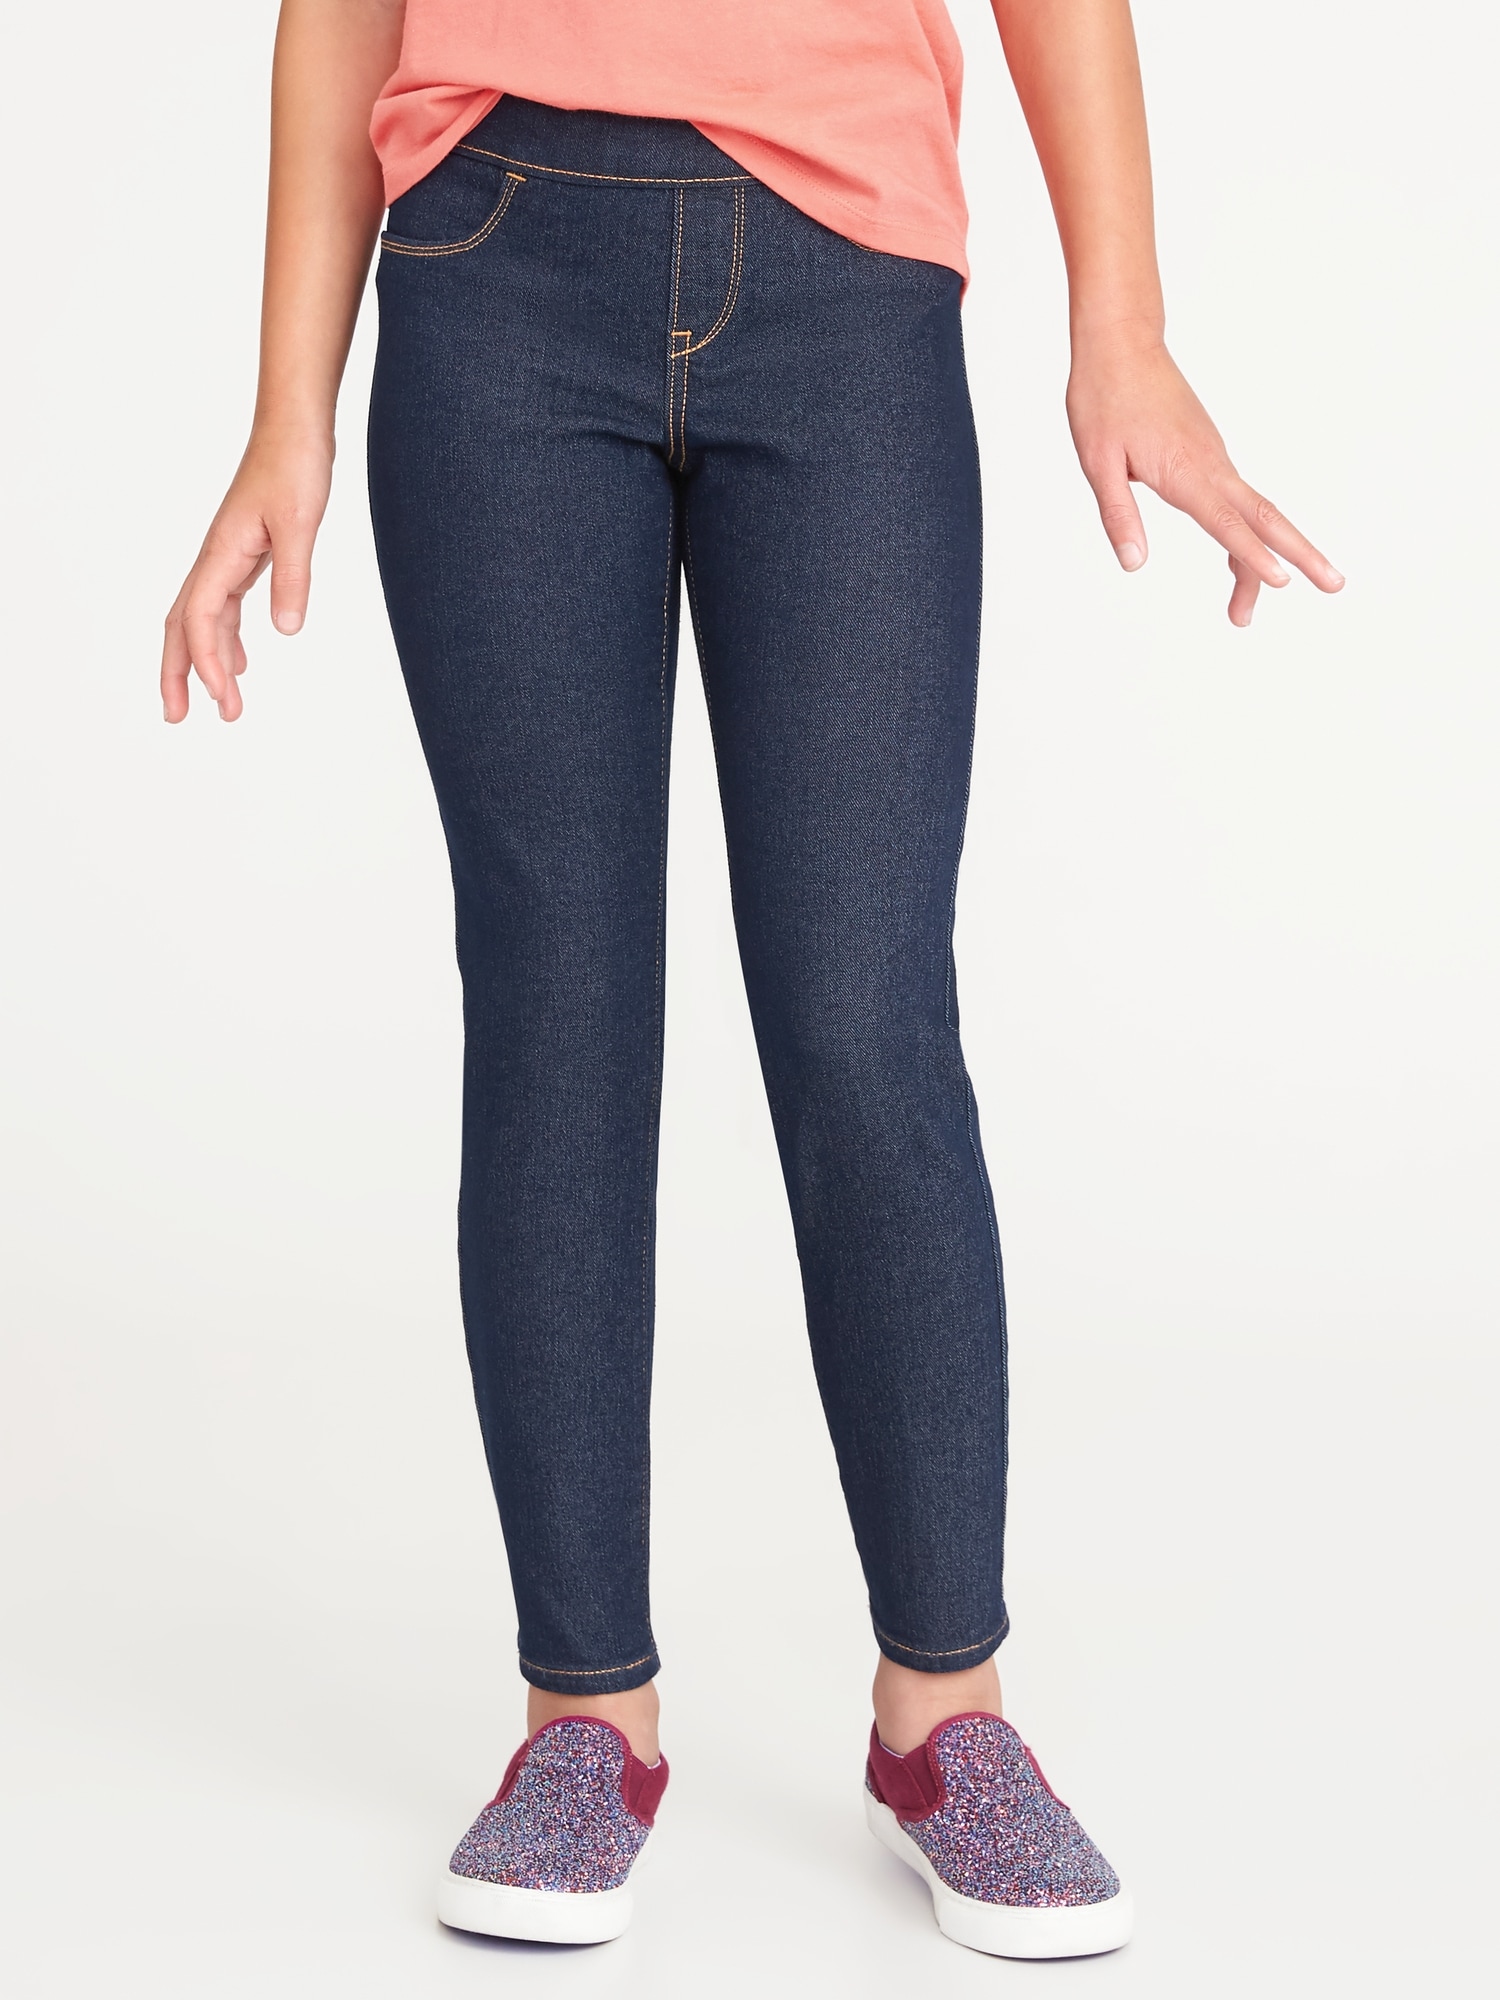 Skinny Built-In Tough Pull-On Jeans for Girls | Old Navy